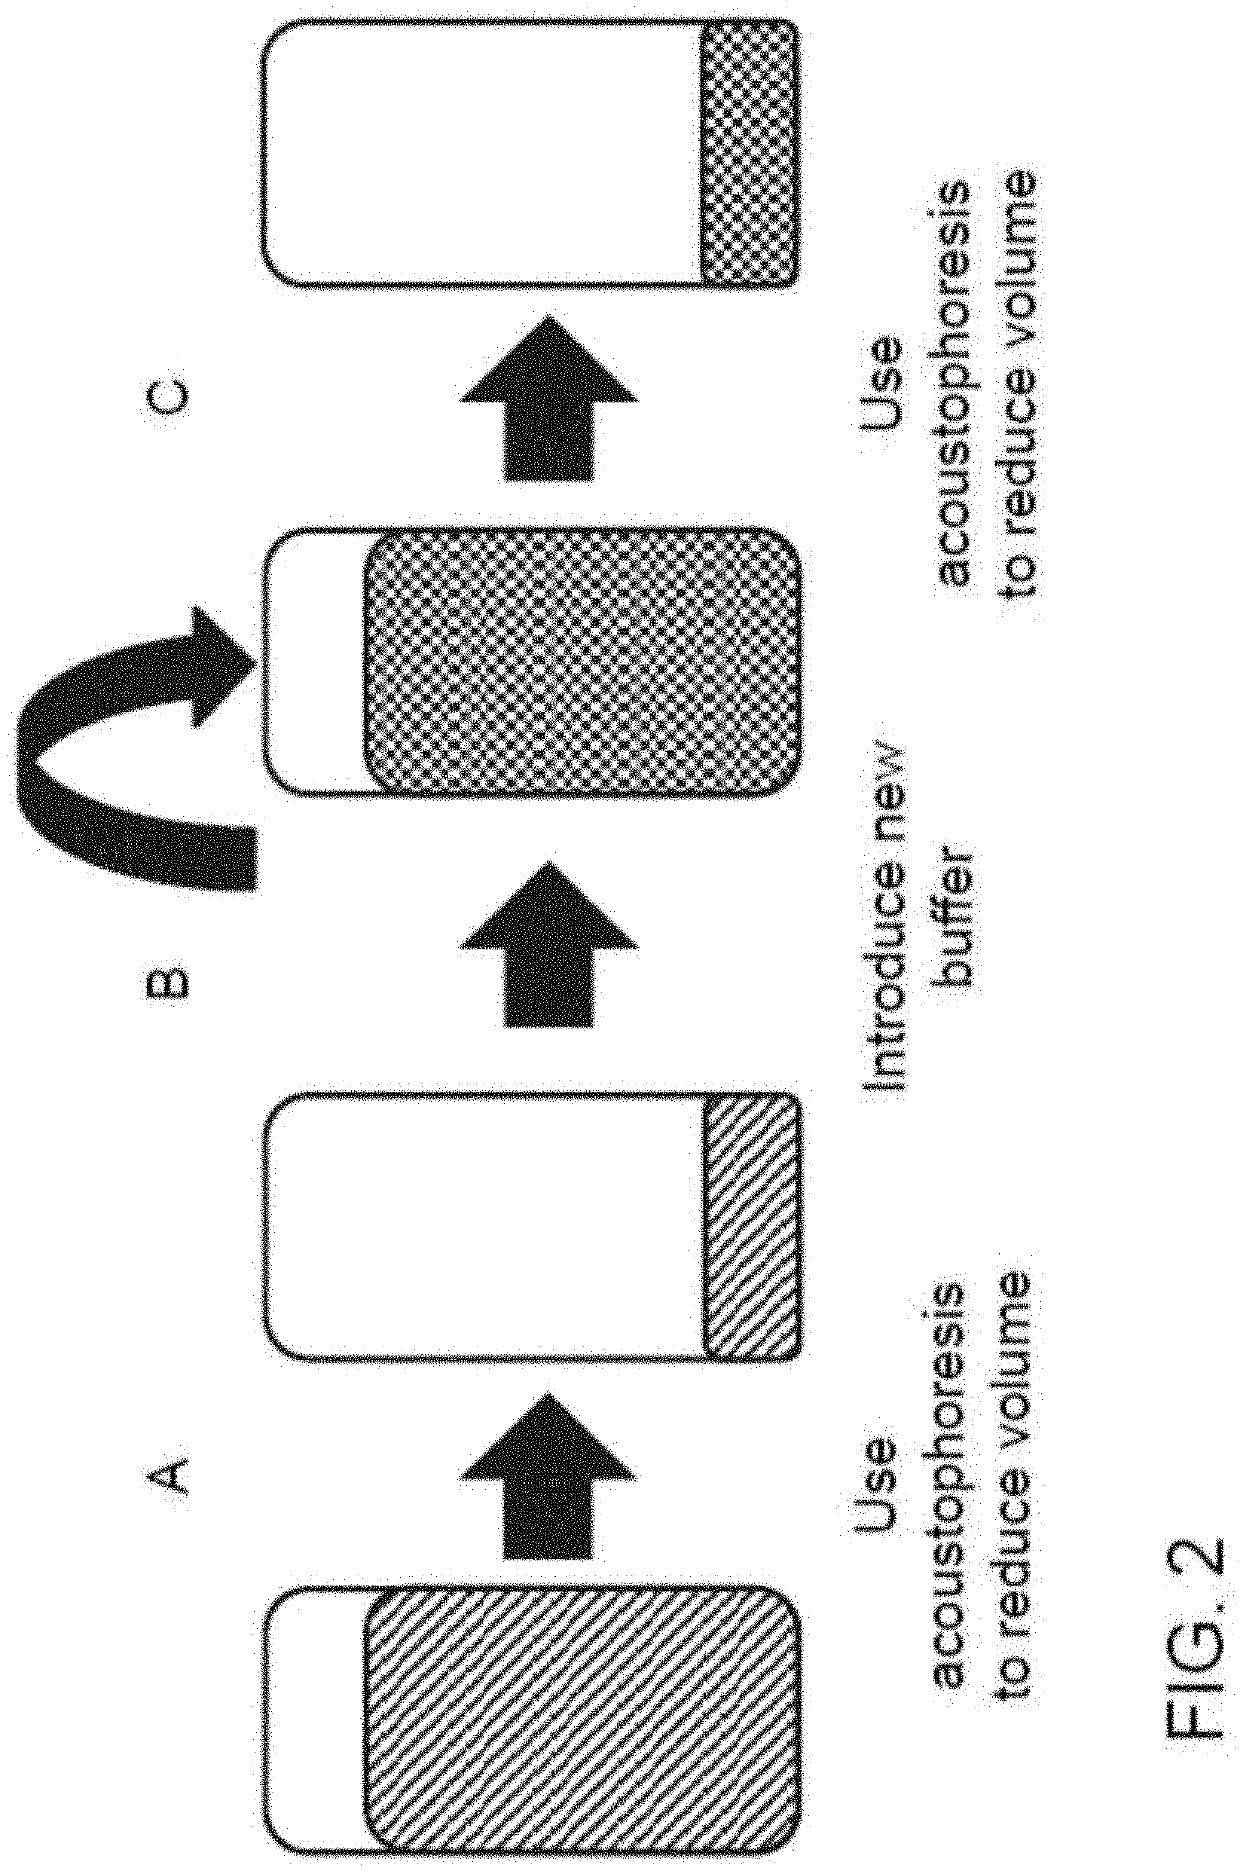 Parameters for concentration and washing of particles with acoustics